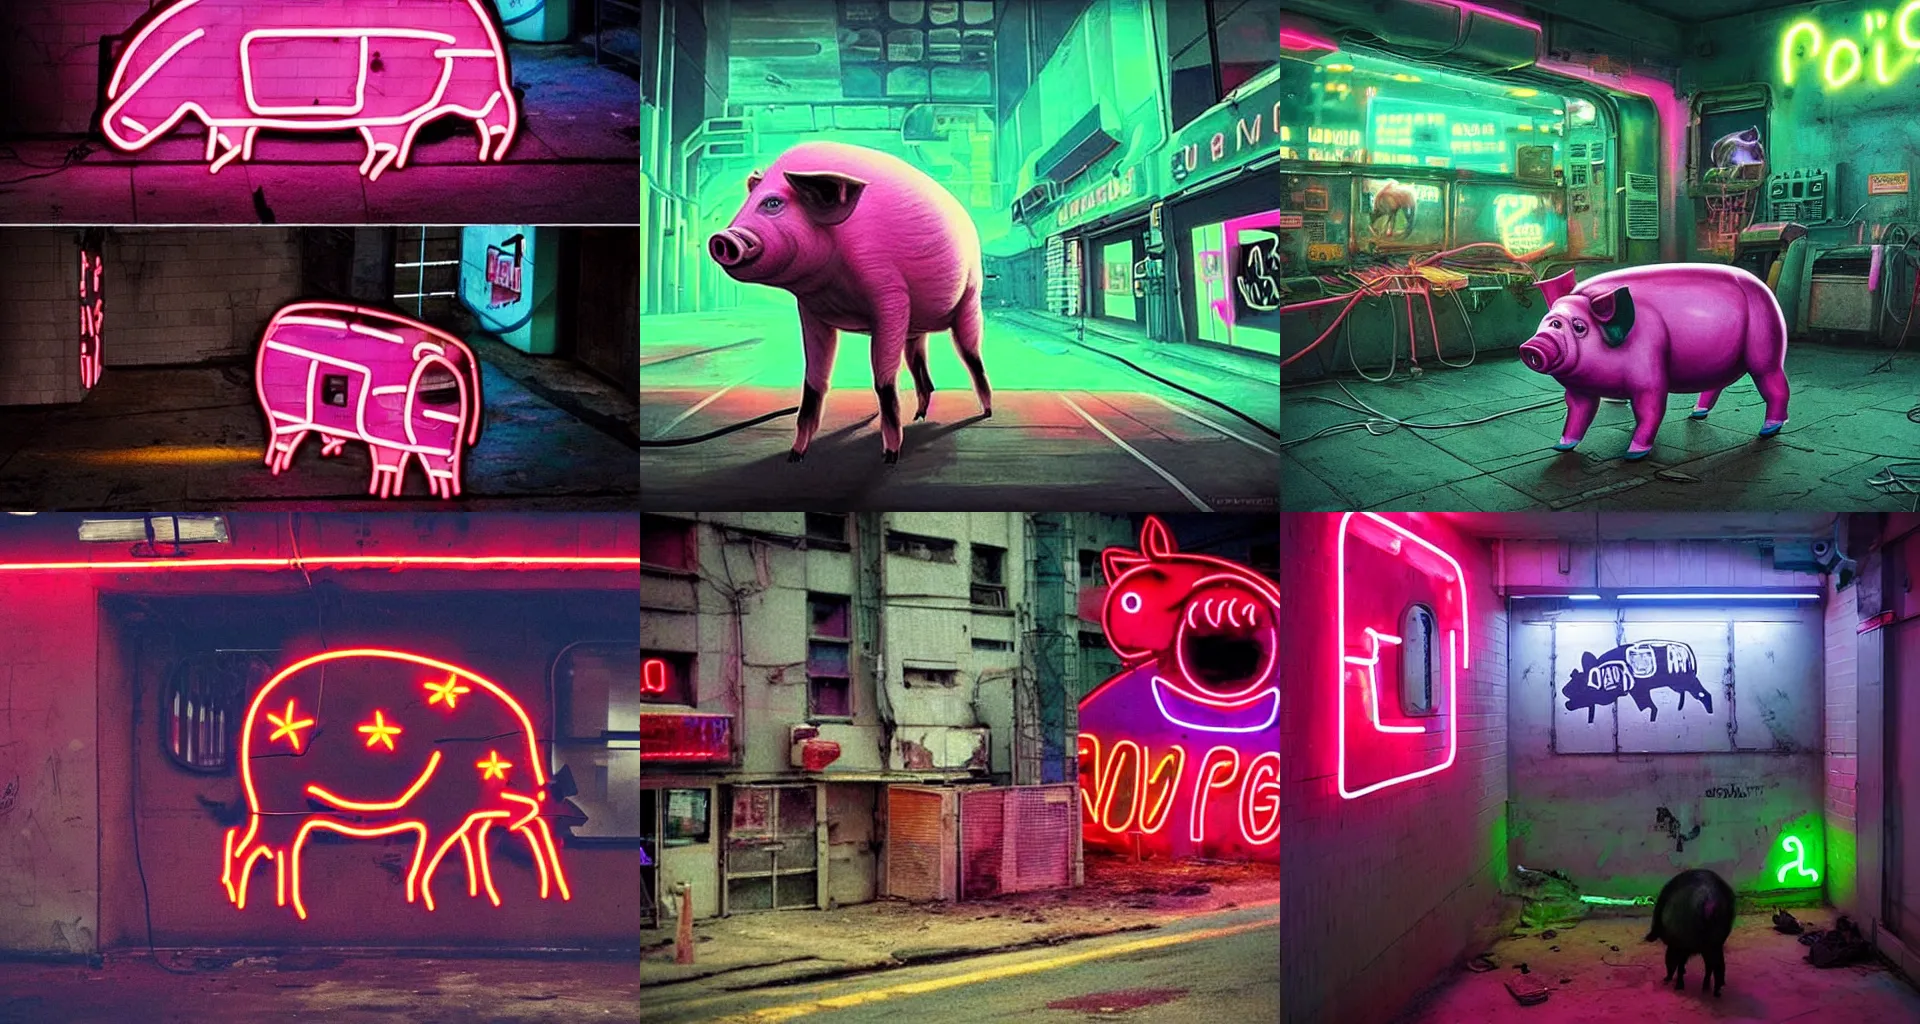 Prompt: It seems that the neon pig is just a metaphor for the rampant cyberpunk dystopia we are headed towards. Neon Pig is a nightmare of futurism and cruelty. All these neon pig are a reminder of the end of the old Soviet era. I don't like the idea of a group of humans living in a space with neon pig technology. The neon pig is one of the most violent, aggressive, destructive and destructive creatures on the planet The neon pig of the future is a symbol of oppression. I see this is a picture of a dystopian future where human bodies are made to function like cyborgs, like the neon pig's. A neon pig in an environment of nuclear wasteland. The neon pig in the foreground is a dystopian future This is a photo of a futuristic environment of cyborgs, robots, and madness. A neon pig painting in the midst of a dystopian landscape. This environment is a mix of futurist science fiction and the dystopian dystopias of the dark ages. Neo-futurism is an ugly, depressing vision of the future. Looks like a cyberpunk setting. The dystopian city is a nightmare of futurism. Neo-futurism. The world is full of artless horrors. neon pig The dark and menacing, neon pig, that will haunt your dreams for a long time. Neutron pigs in an environment of violence. Neo-futurism. The world is a wasteland, filled with evil robots and violent cyborgs, a dystopia of a thousand dead faces.